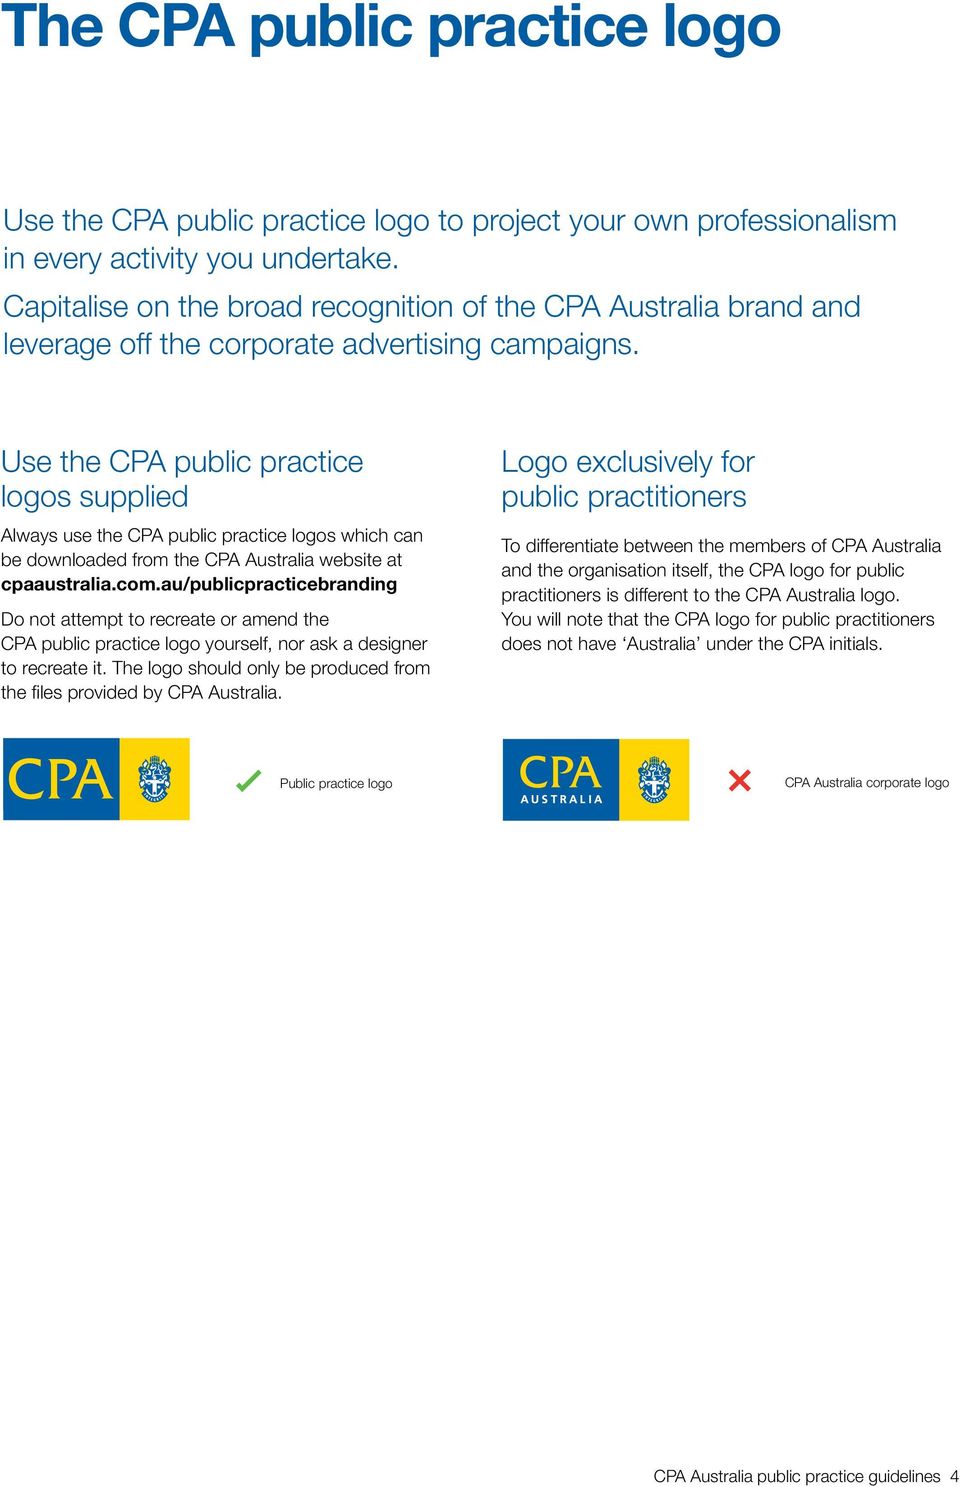 Use the P public practice logos supplied lways use the P public practice logos which can be downloaded from the P ustralia website at cpaaustralia.com.